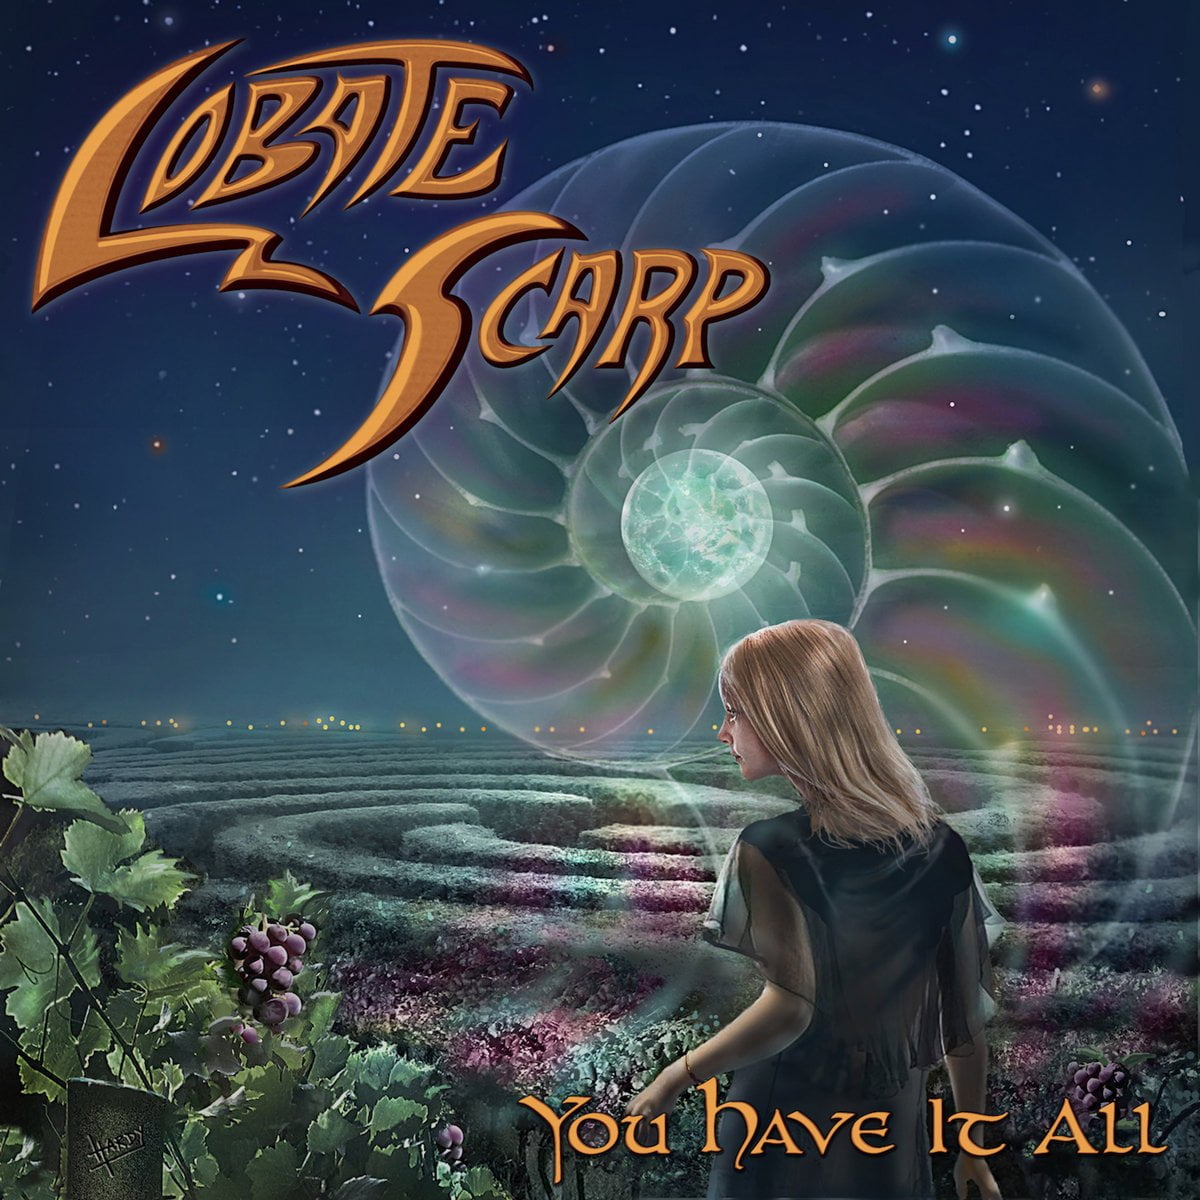 Lobate Scarp - You Have it All